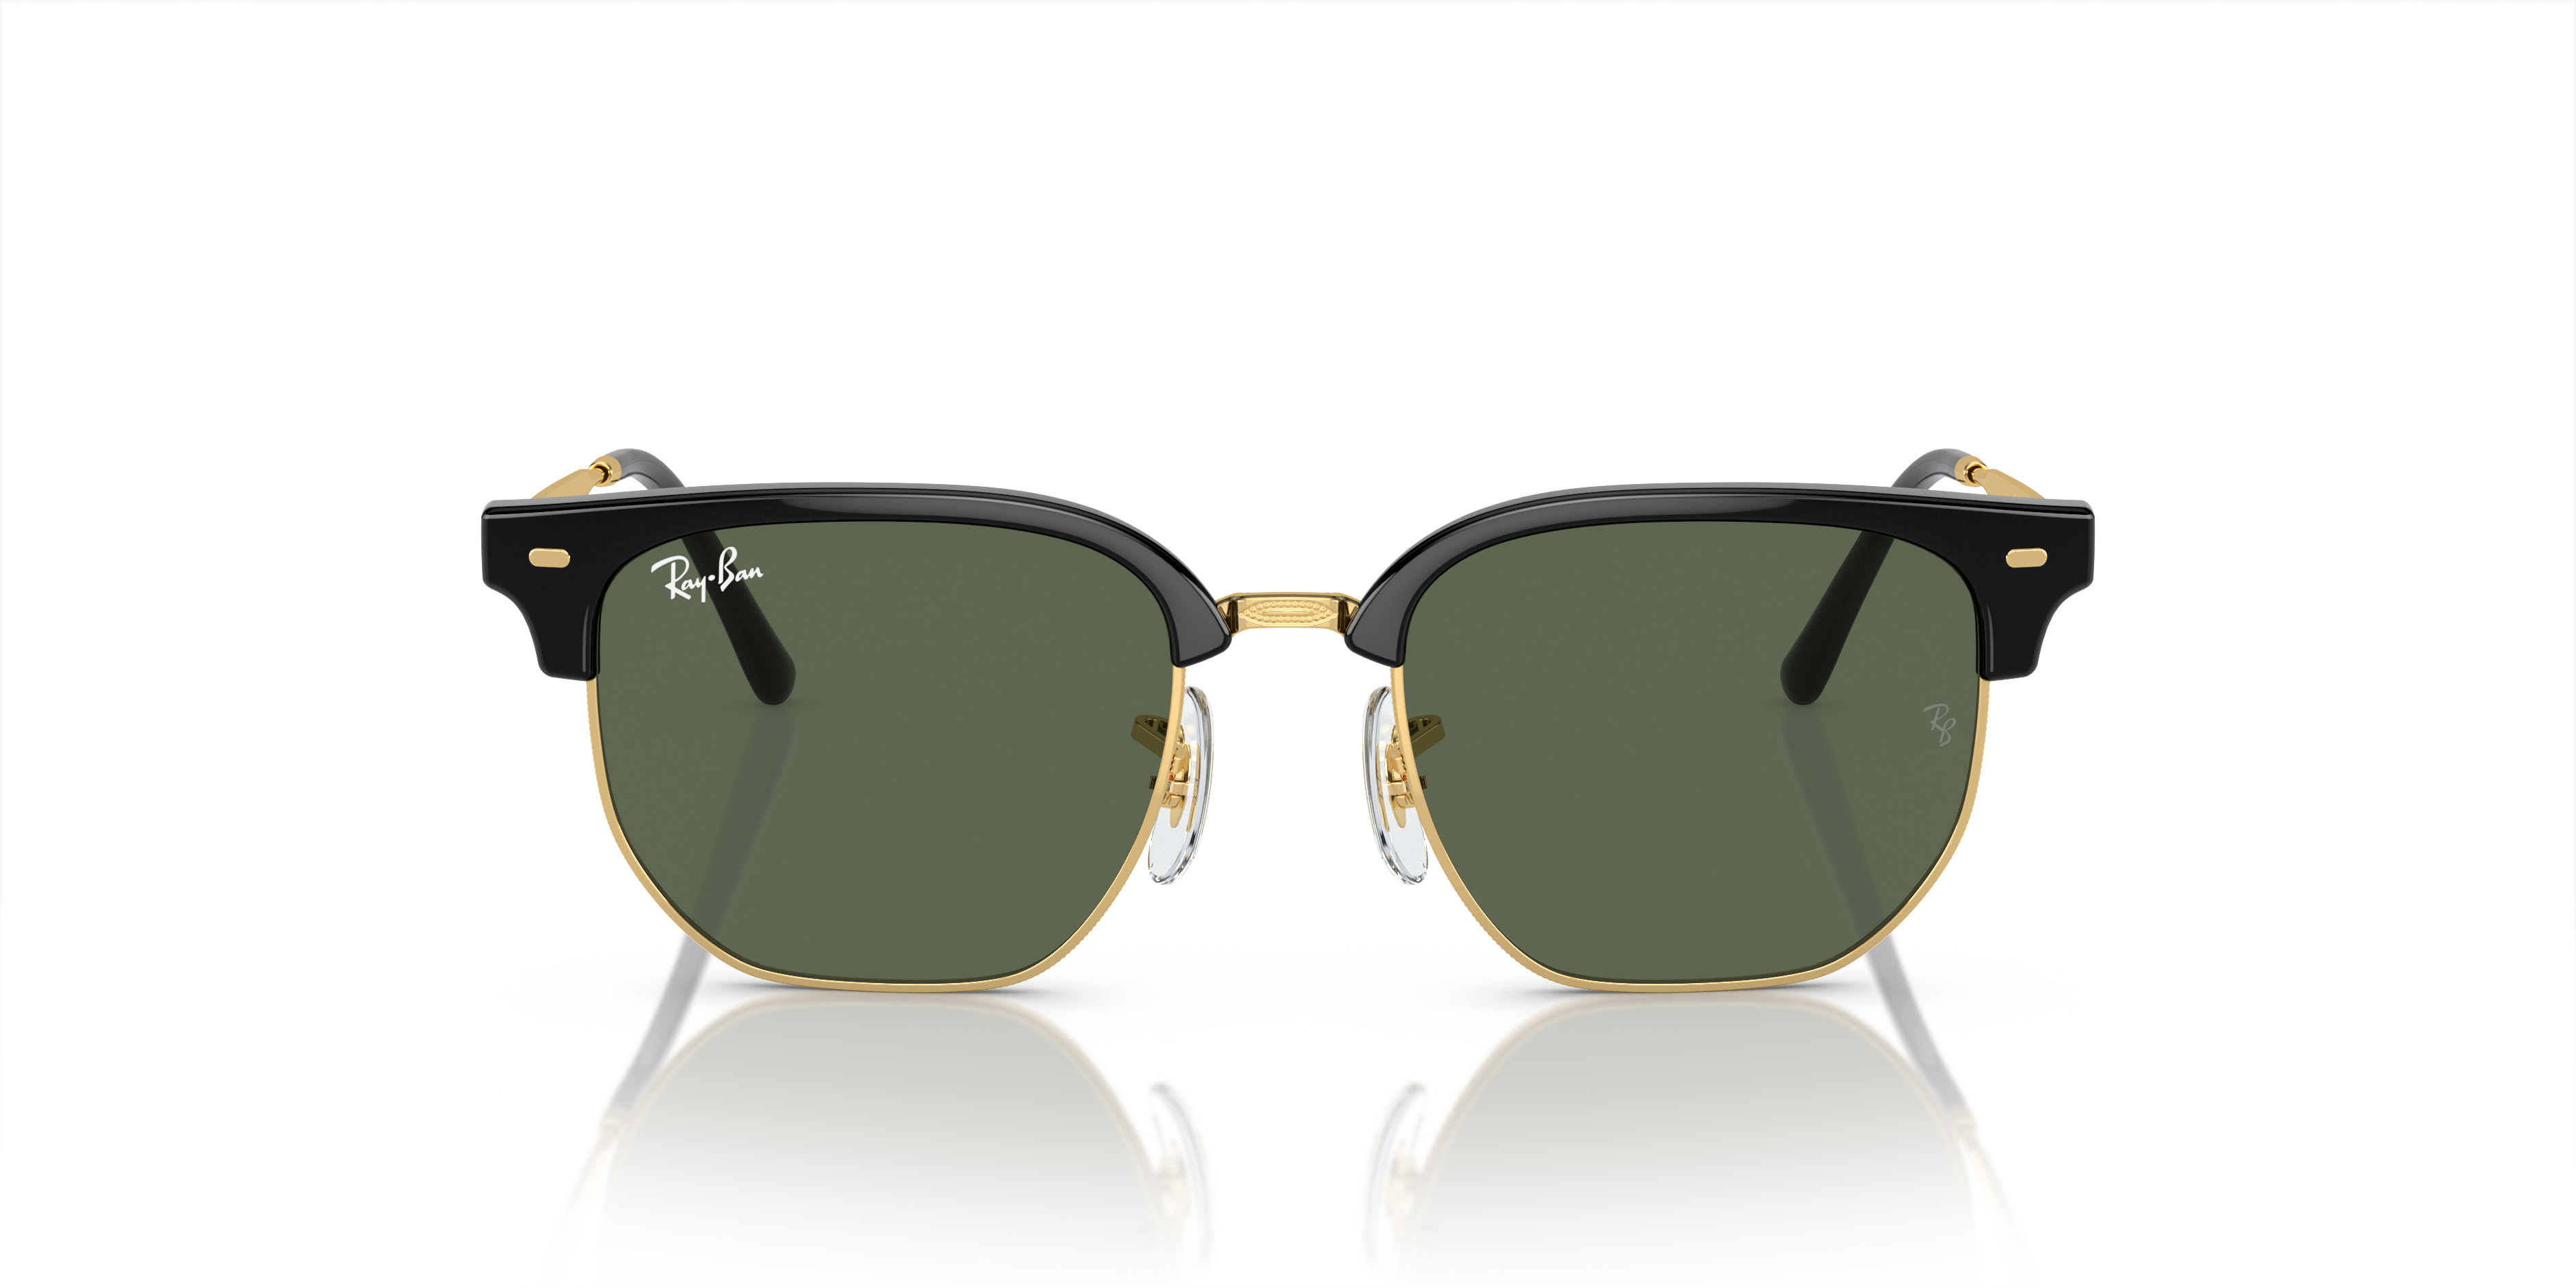 [products.image.front] RAY-BAN RJ9116S 100/71